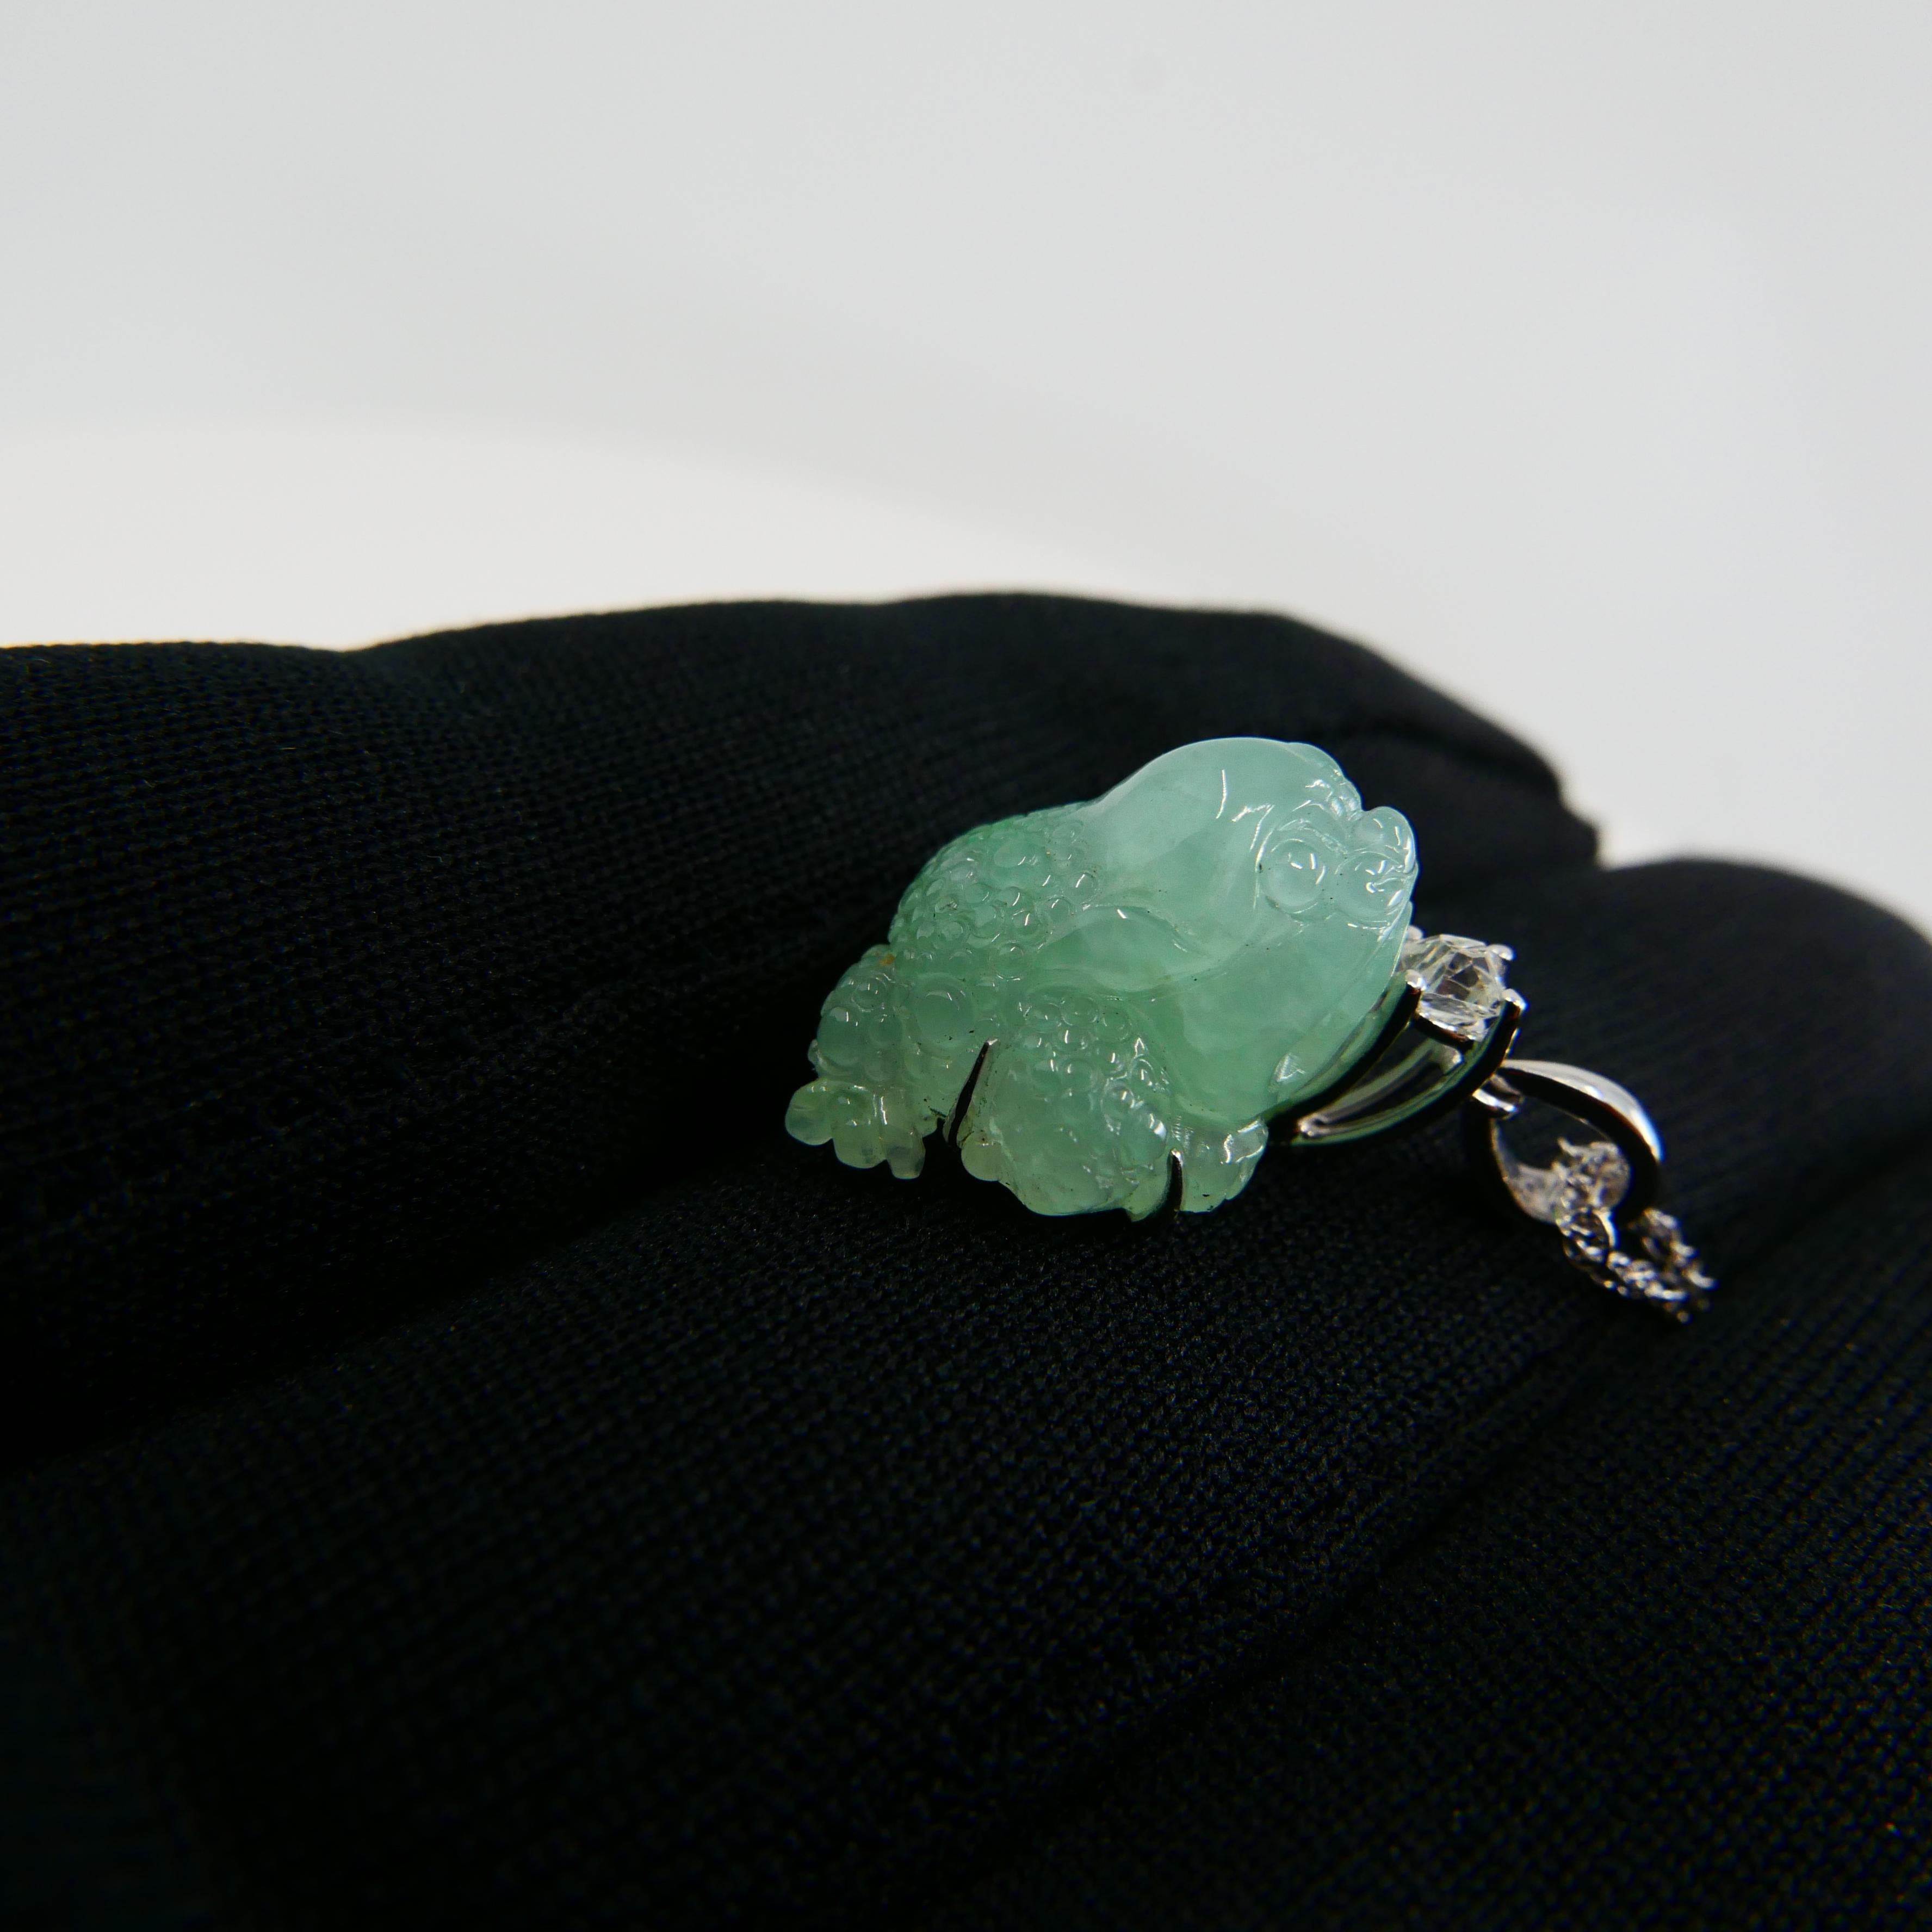 Certified Type A Jade Mythical Beast Drop Pendant Necklace, Icy Green 1